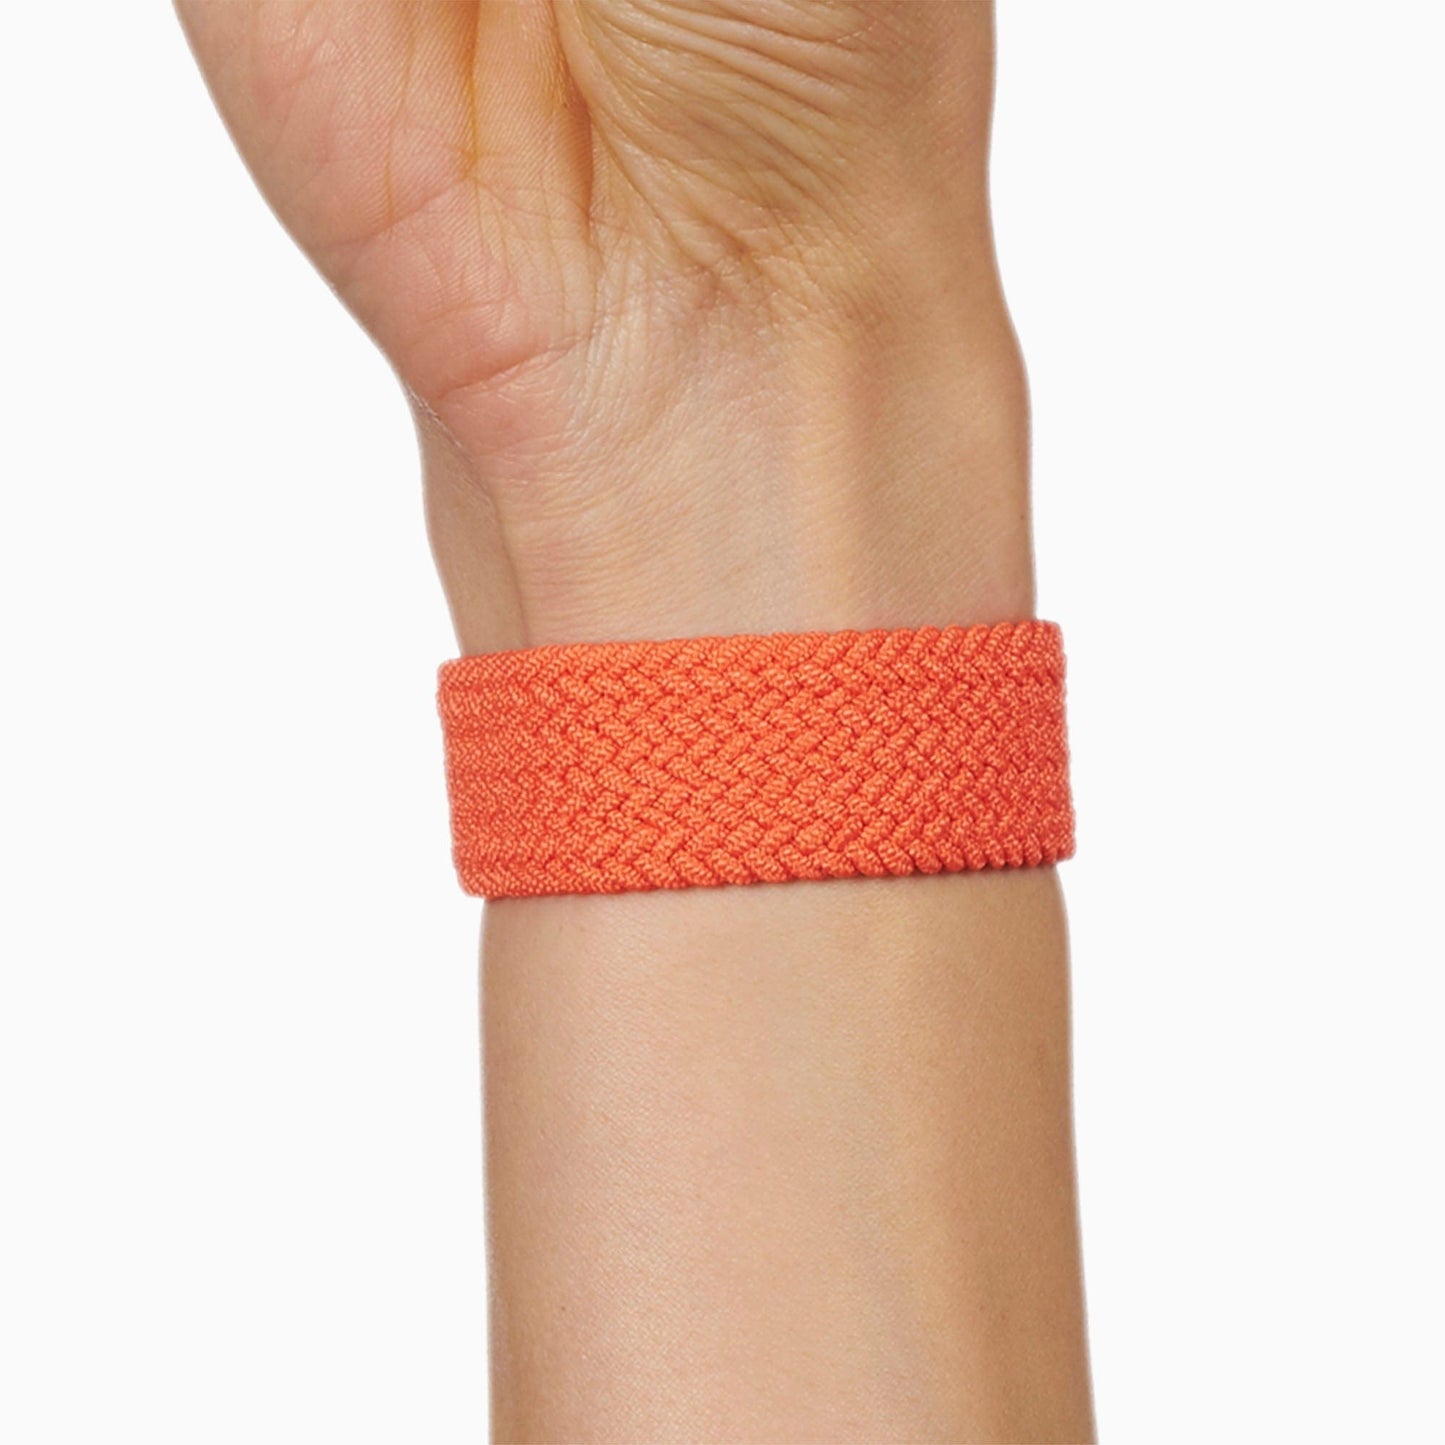 Electric Orange Braided Solo Loop for Apple Watch